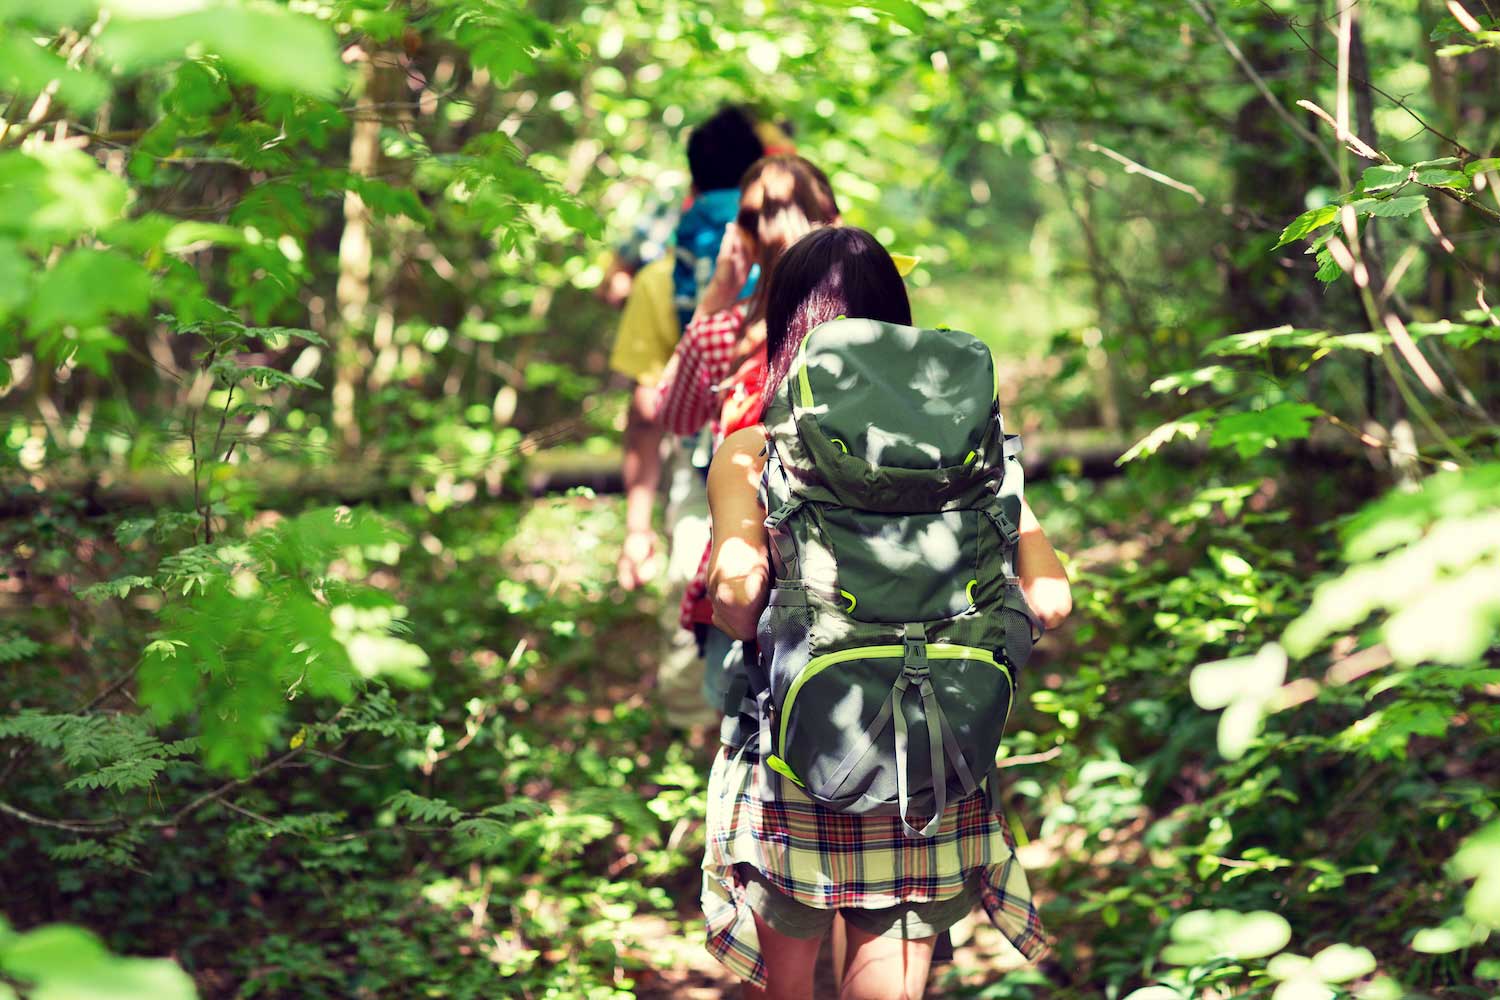 A line of young people hiking through the woods.